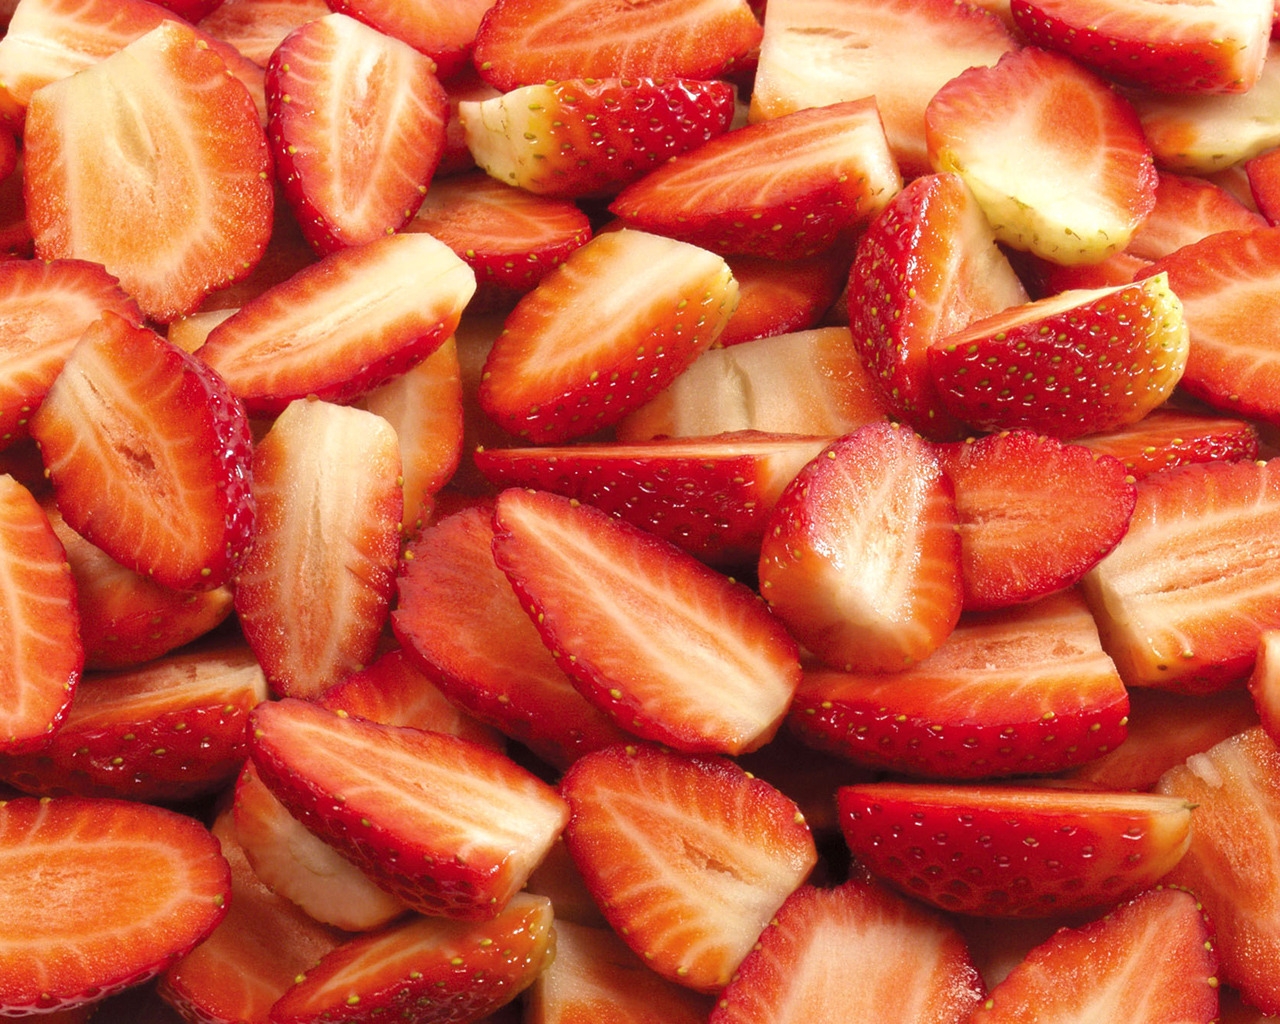 Sliced Strawberry for 1280 x 1024 resolution